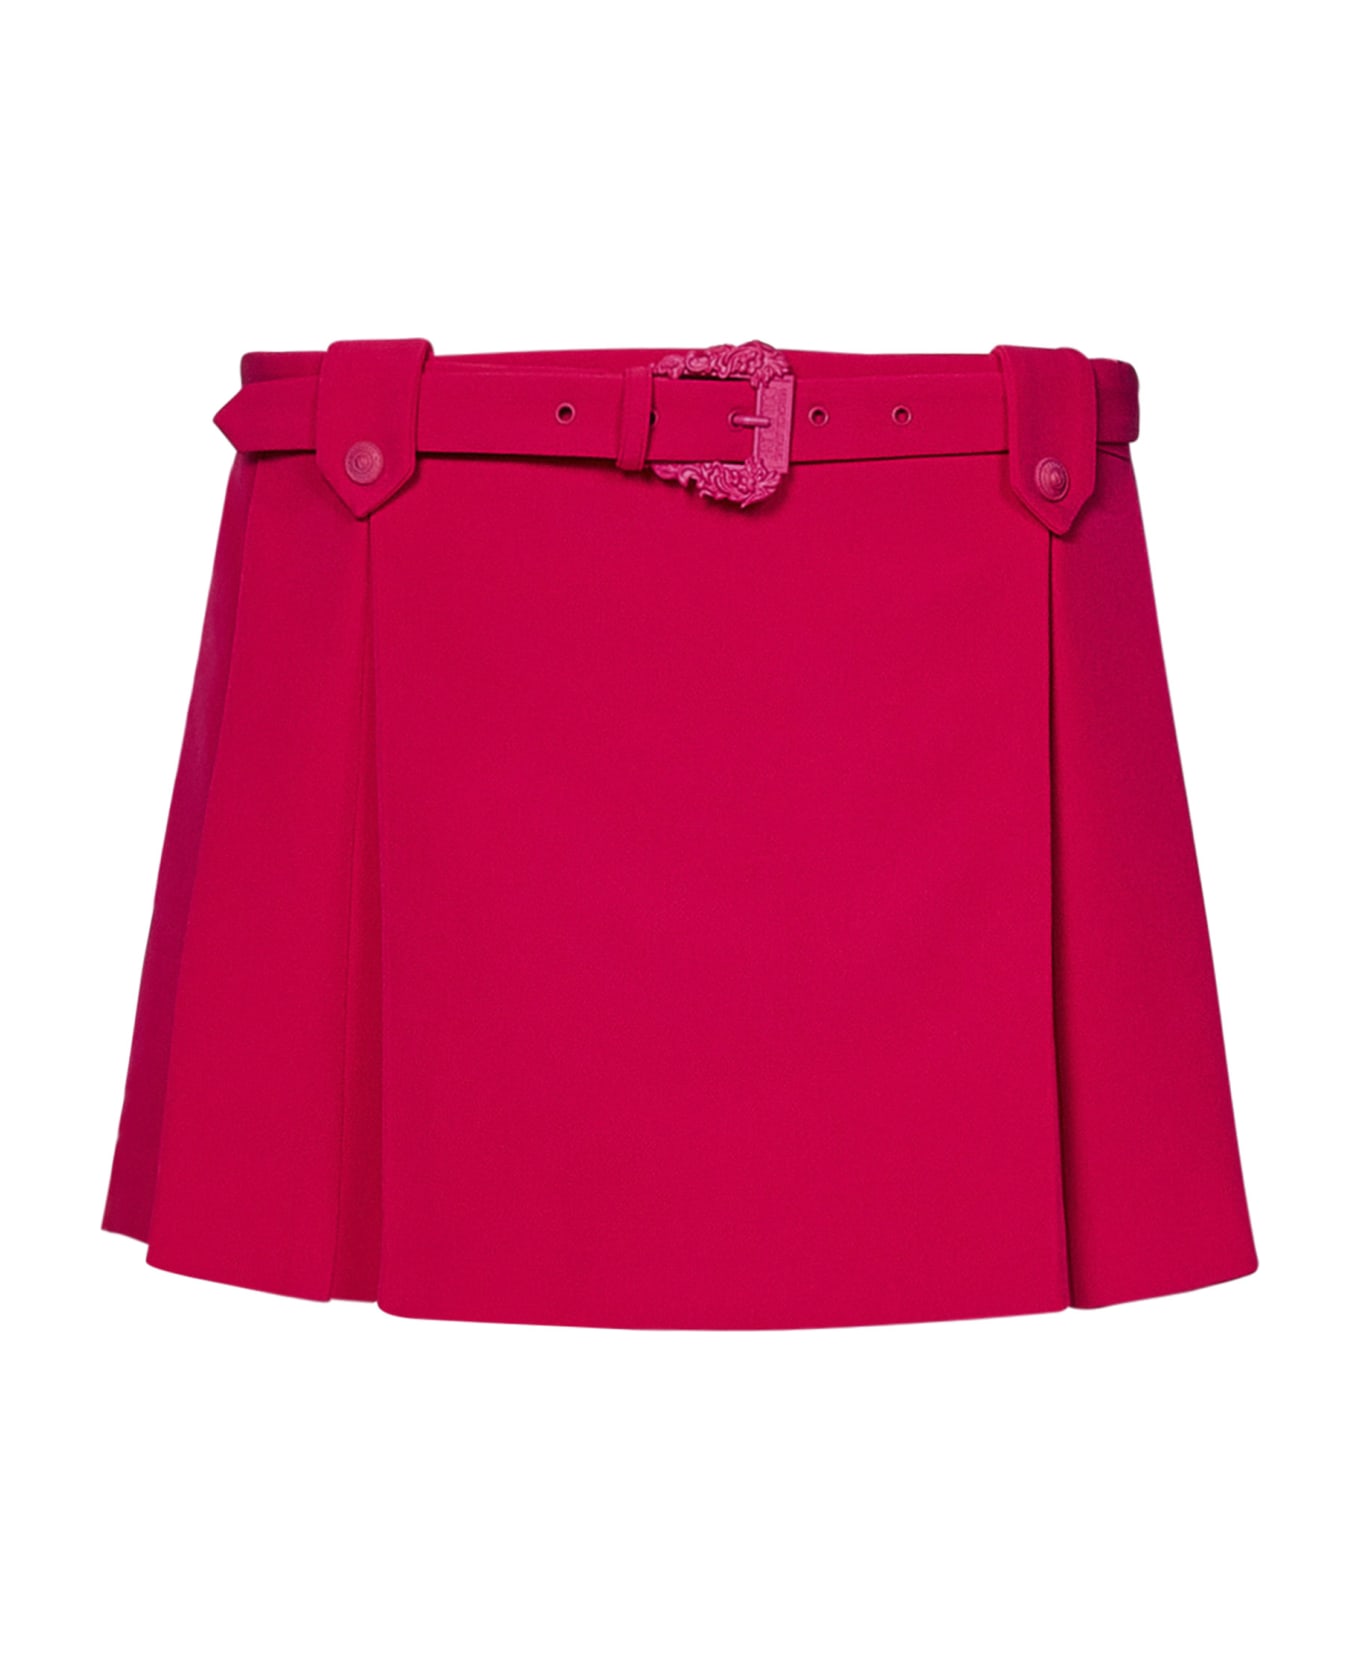 Versace Jeans Couture Skirt - Hot Pink